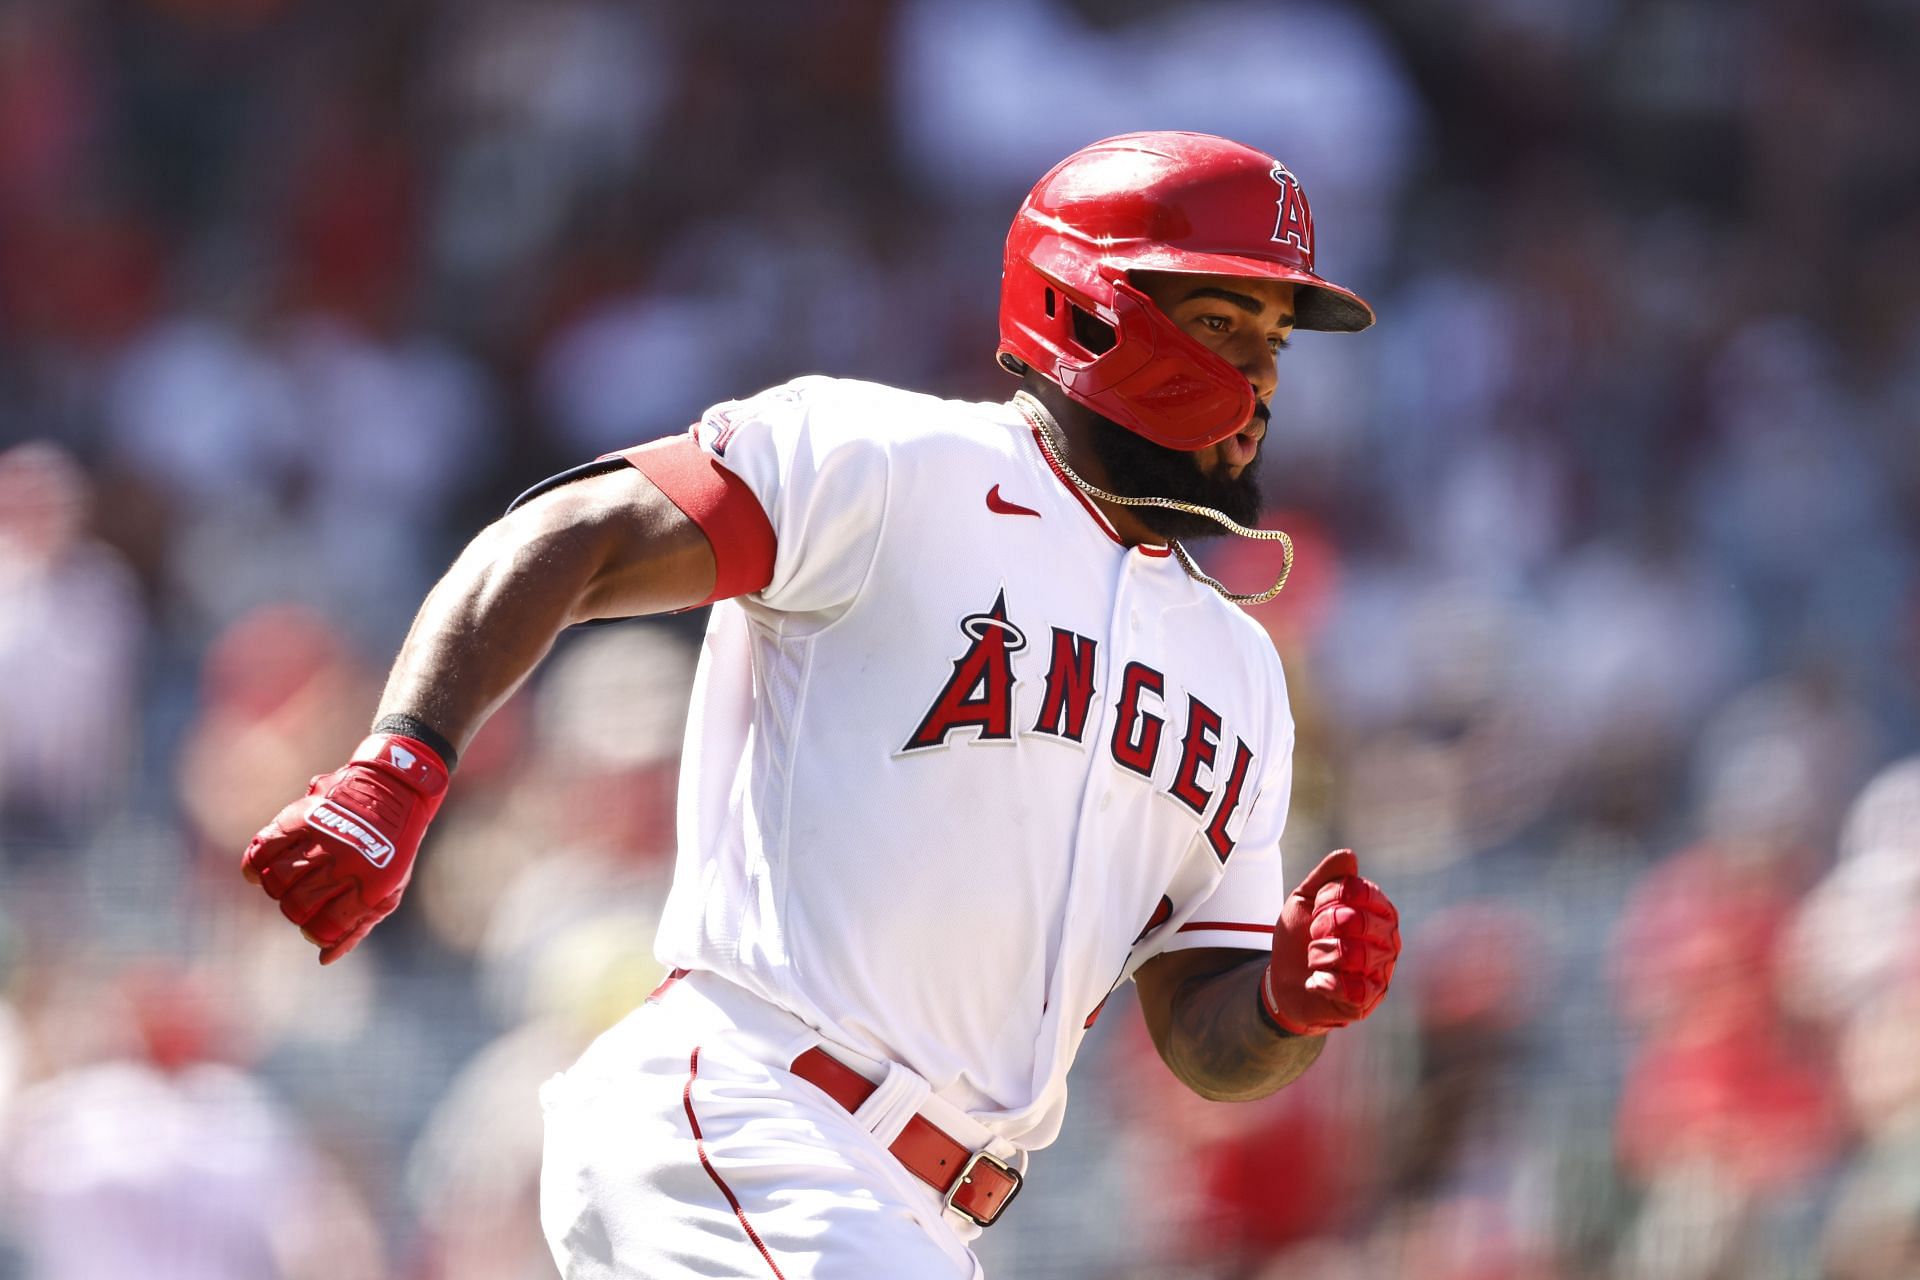 The Los Angeles Angels travel to face the Detroit Tigers on Friday.